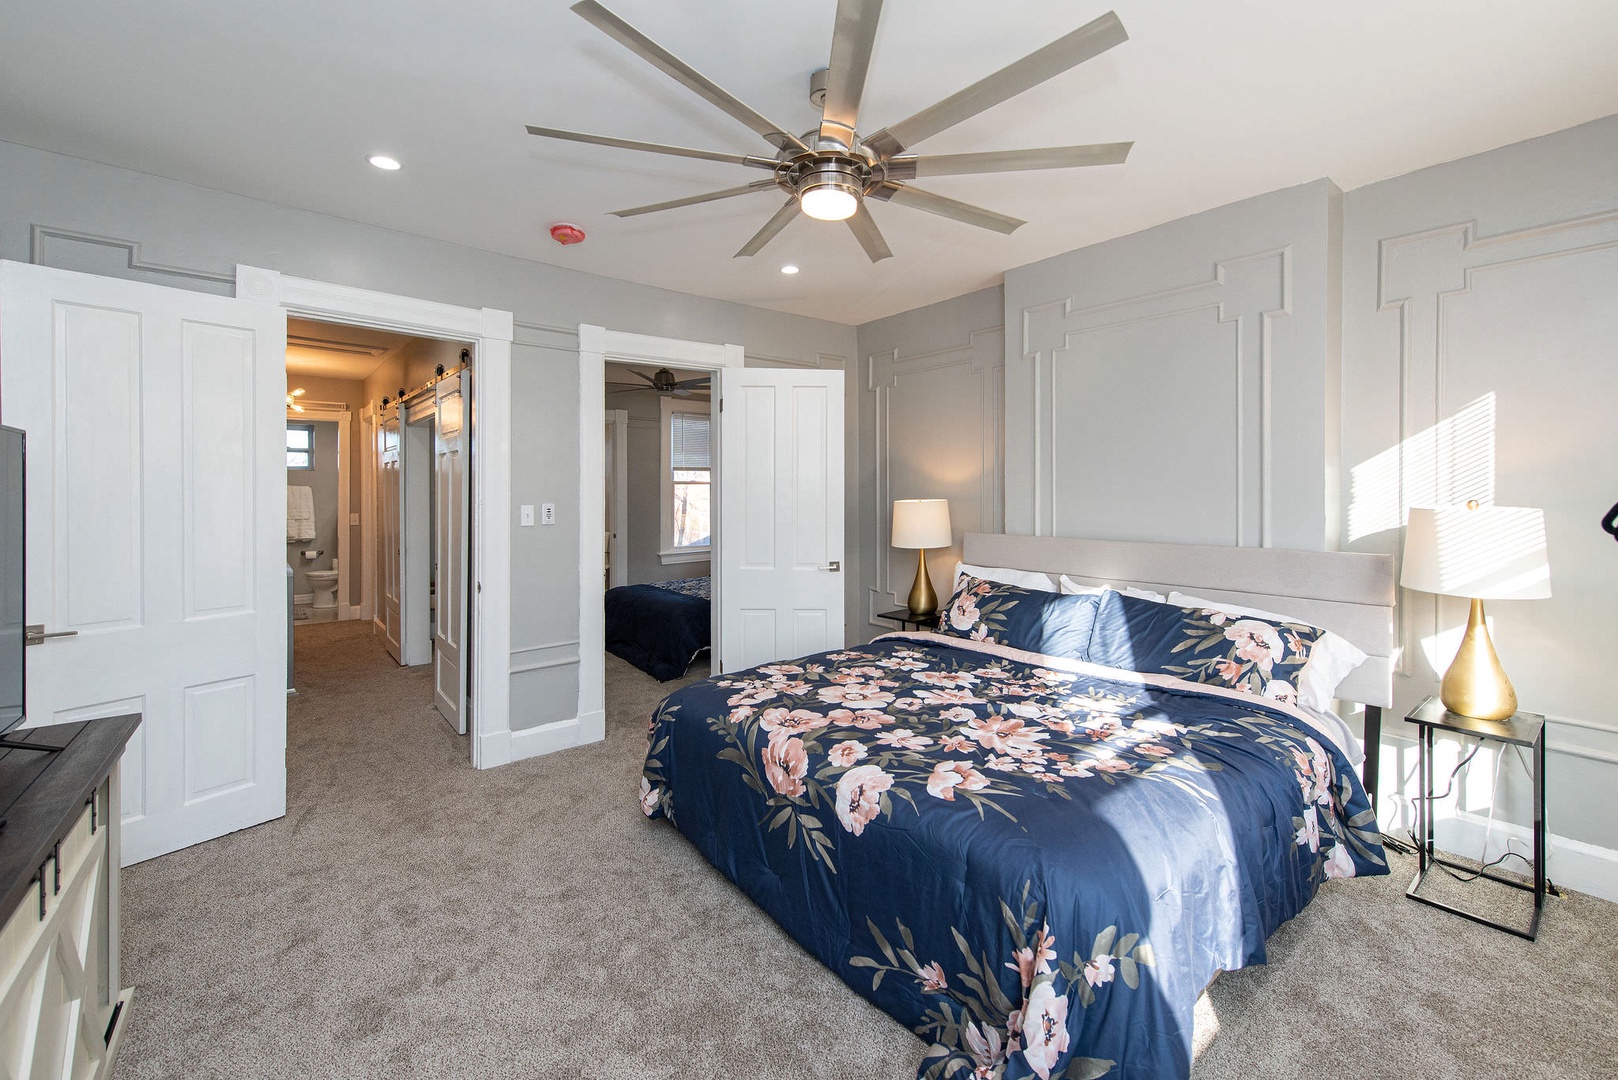 Suite 2 – The primary bedroom offers a king bed, Smart TV, & ceiling fan